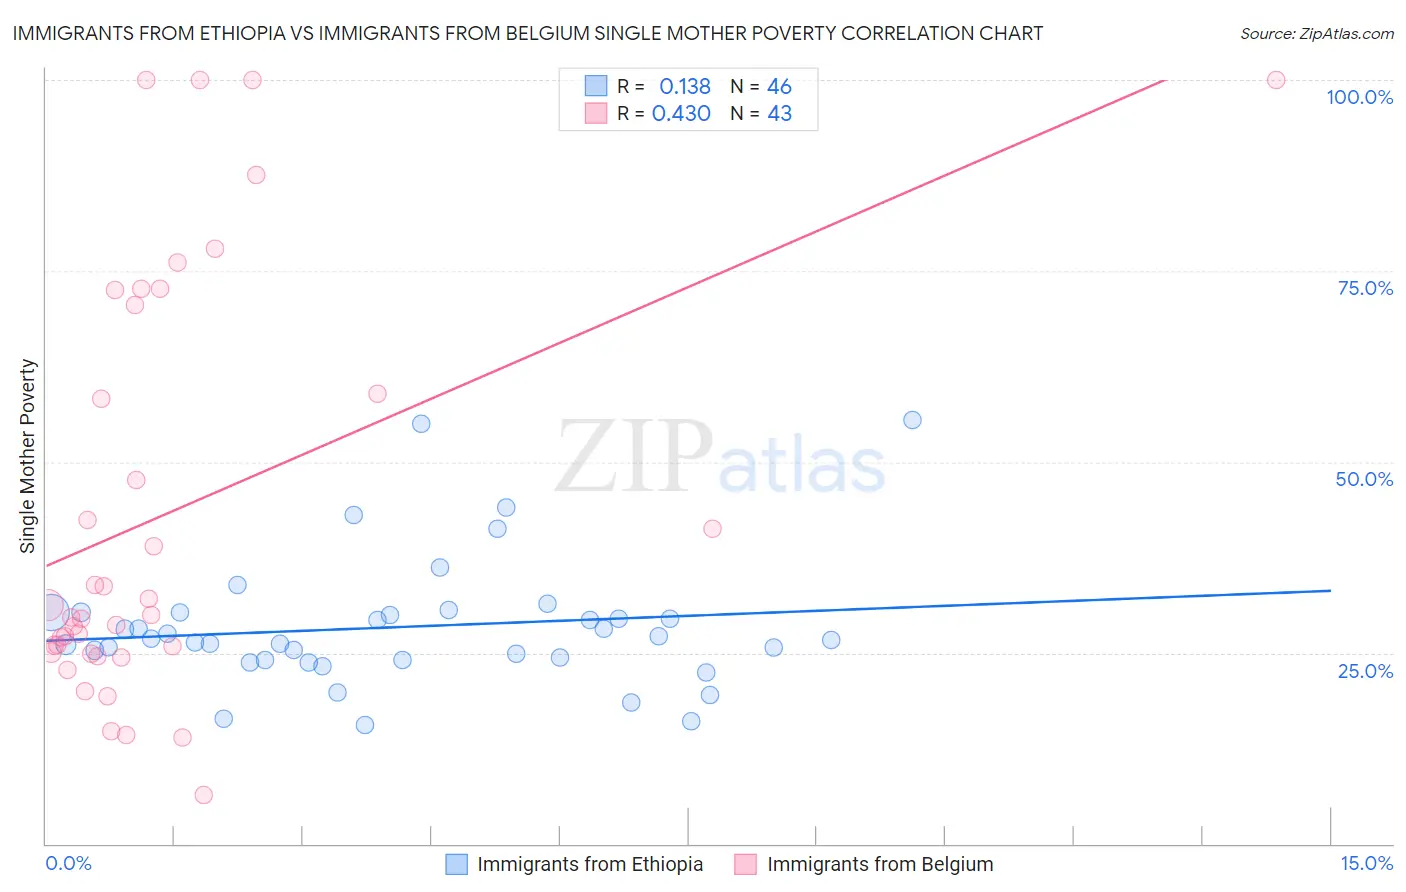 Immigrants from Ethiopia vs Immigrants from Belgium Single Mother Poverty